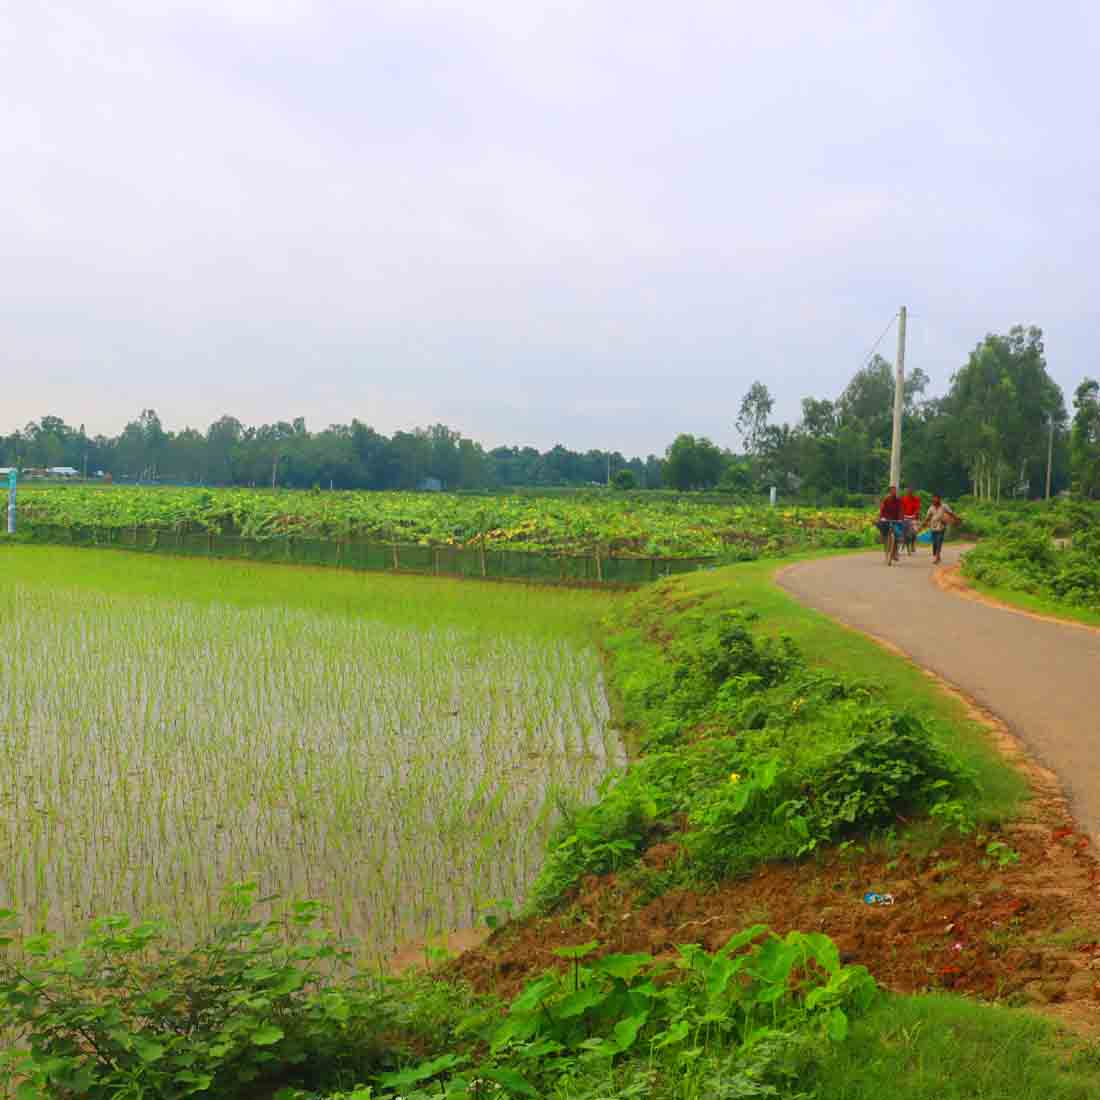 Tree Ghar village people & roads stock photos in Bangladesh preview image.